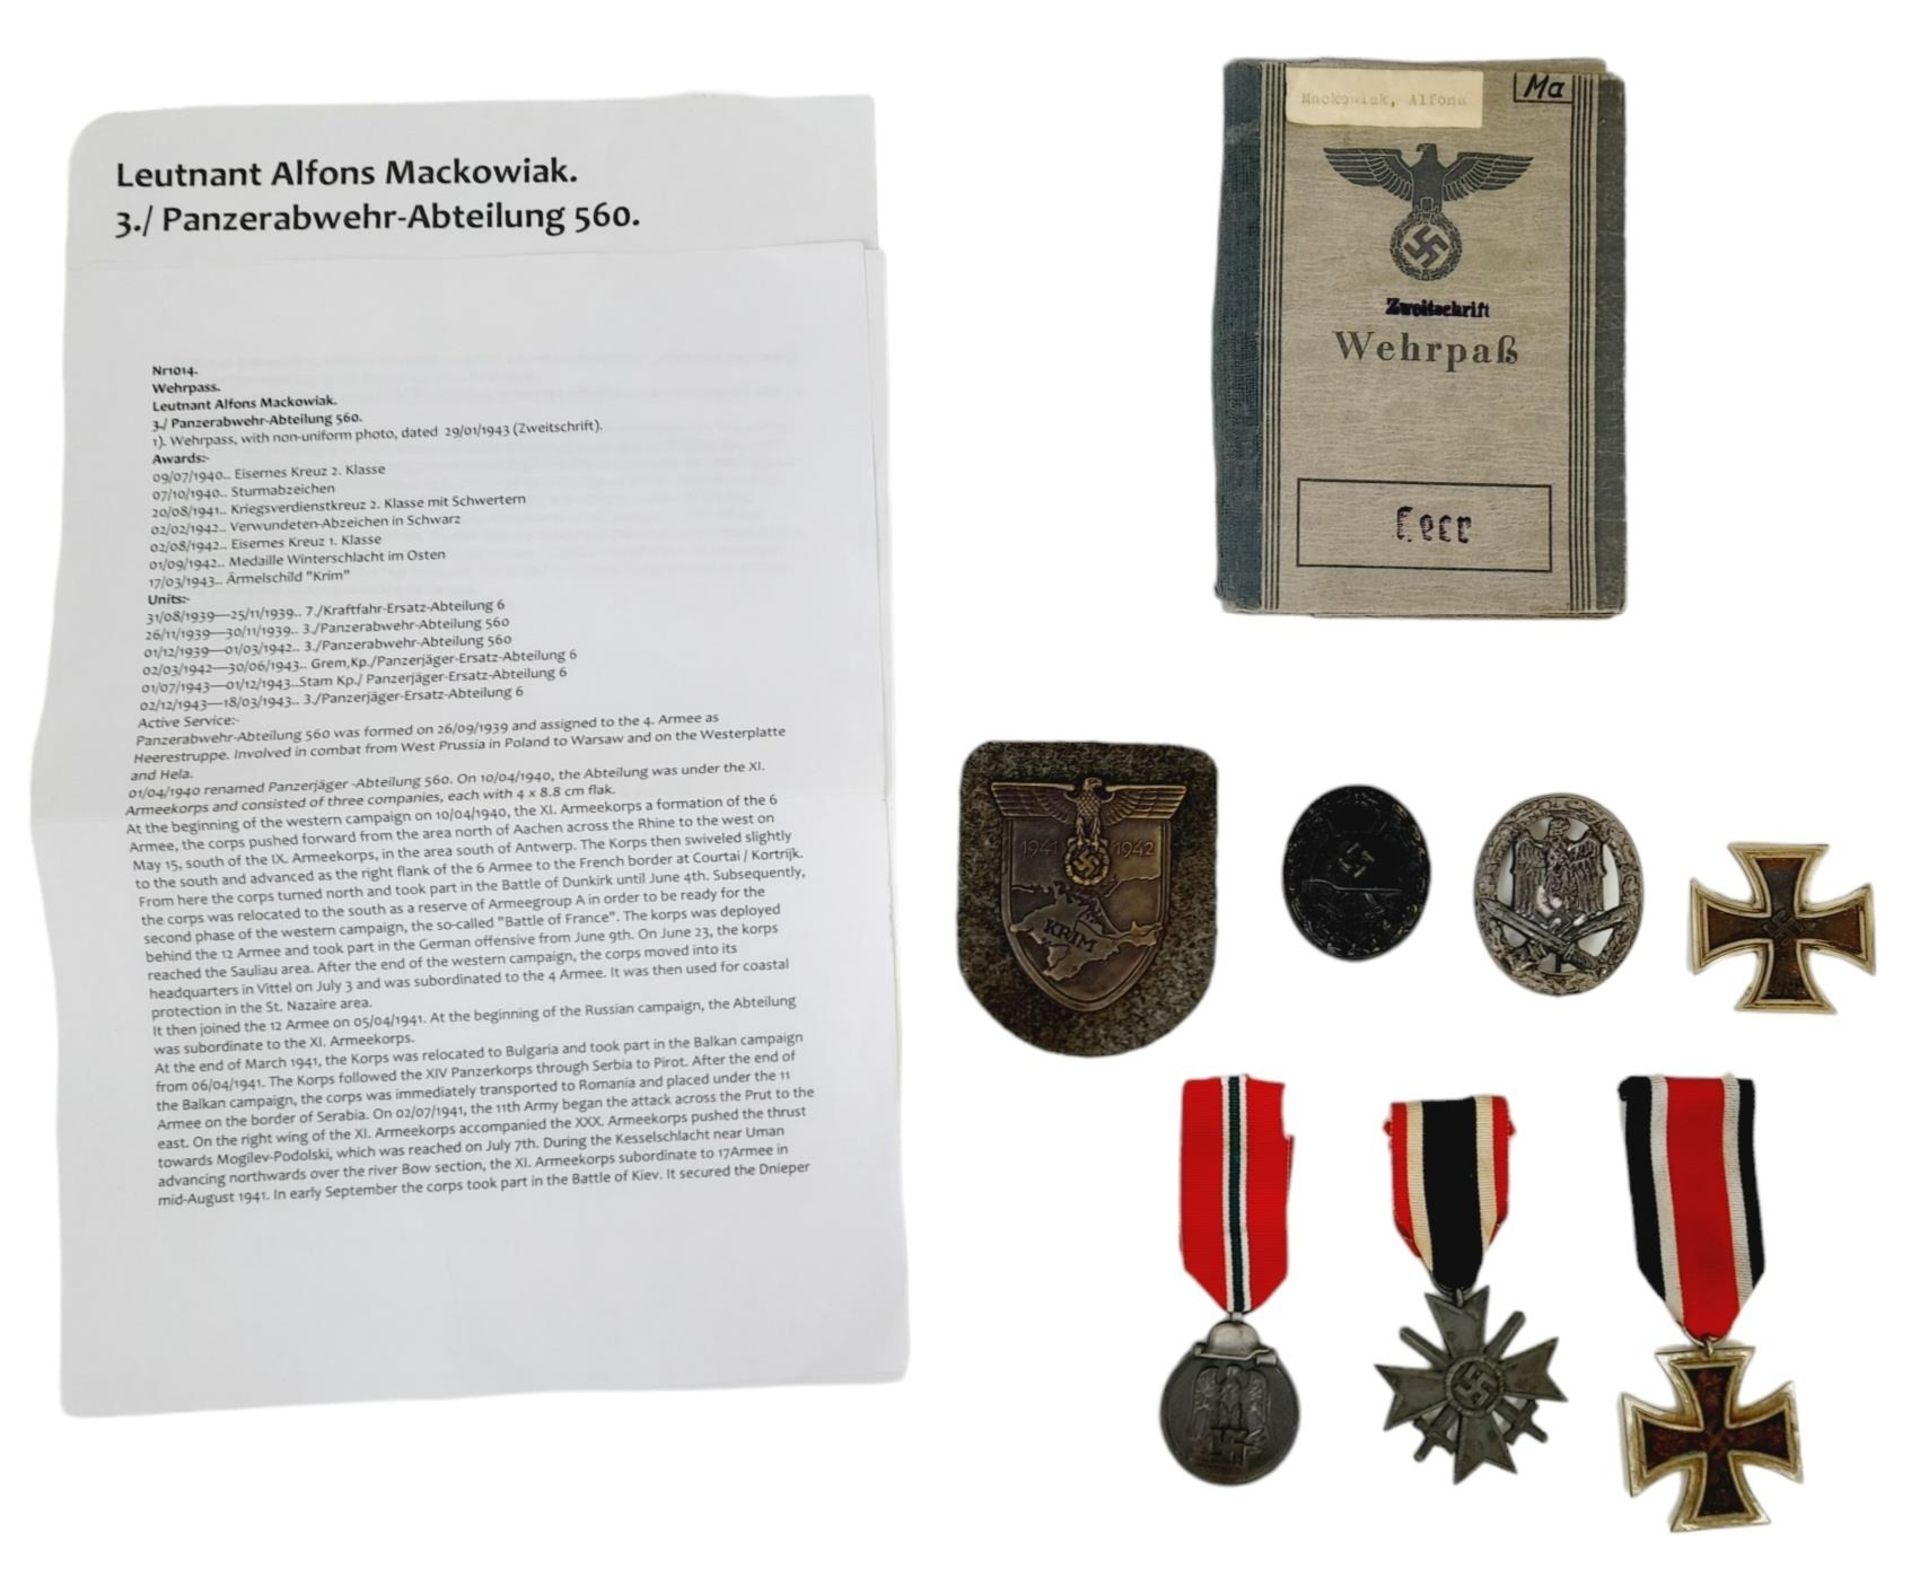 WW2 German Wehrpass & Awards to Leutnant Alfons Macowiak who served with several Panzerjäger (Tank